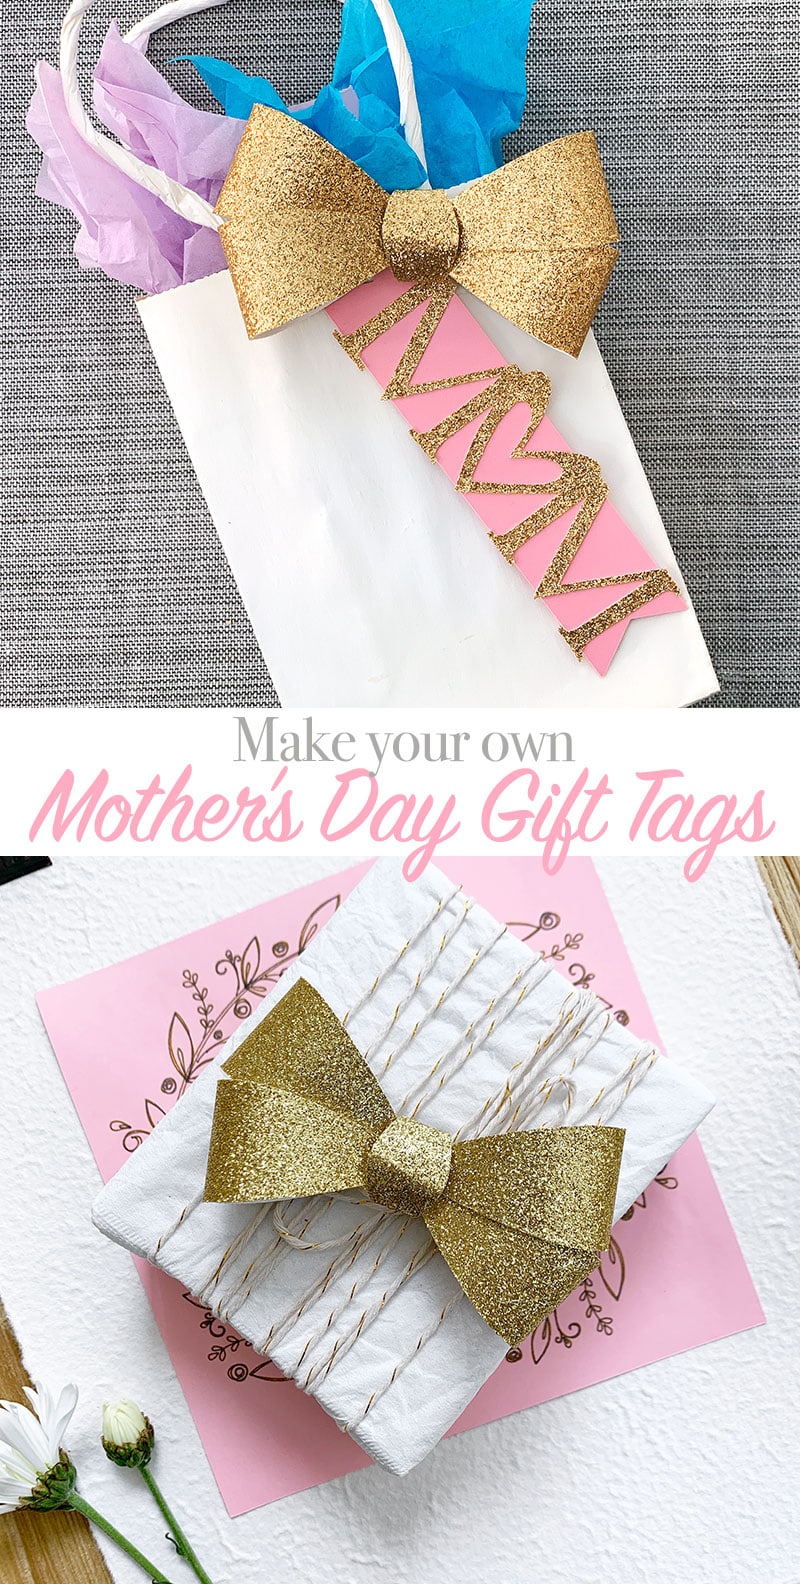 Handmade Gift tag and bow made with Cricut - personalize for Mom - designed by Jen Goode